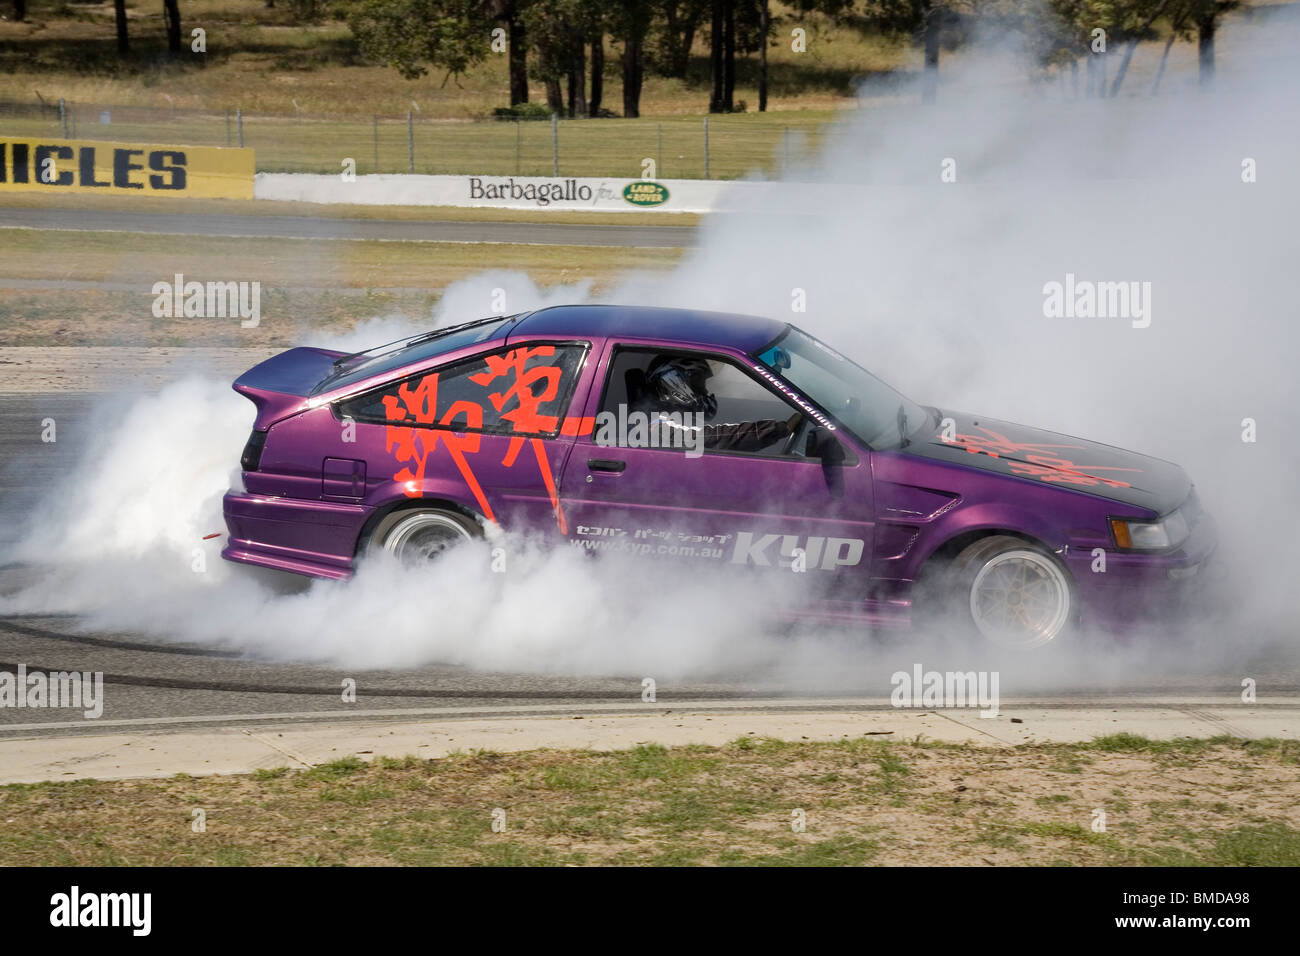 Photo: Cars roar and smoke during Cortez burnout – The Journal